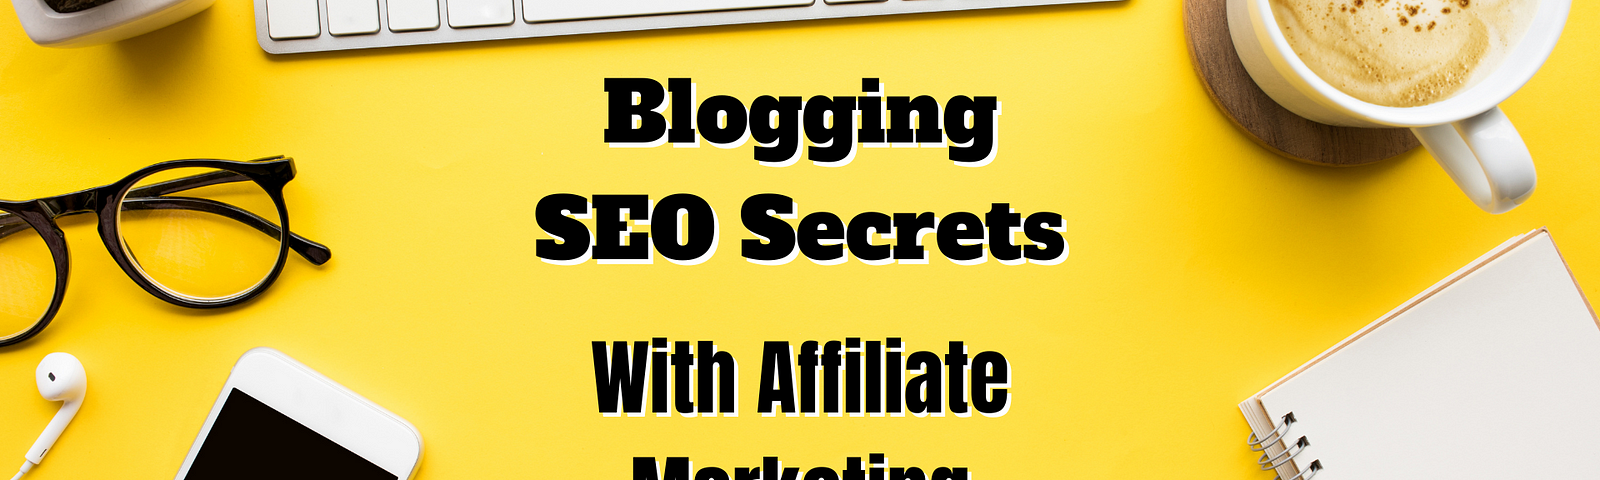 Generate Affiliate Marketing Sales With These Blogging Secrets